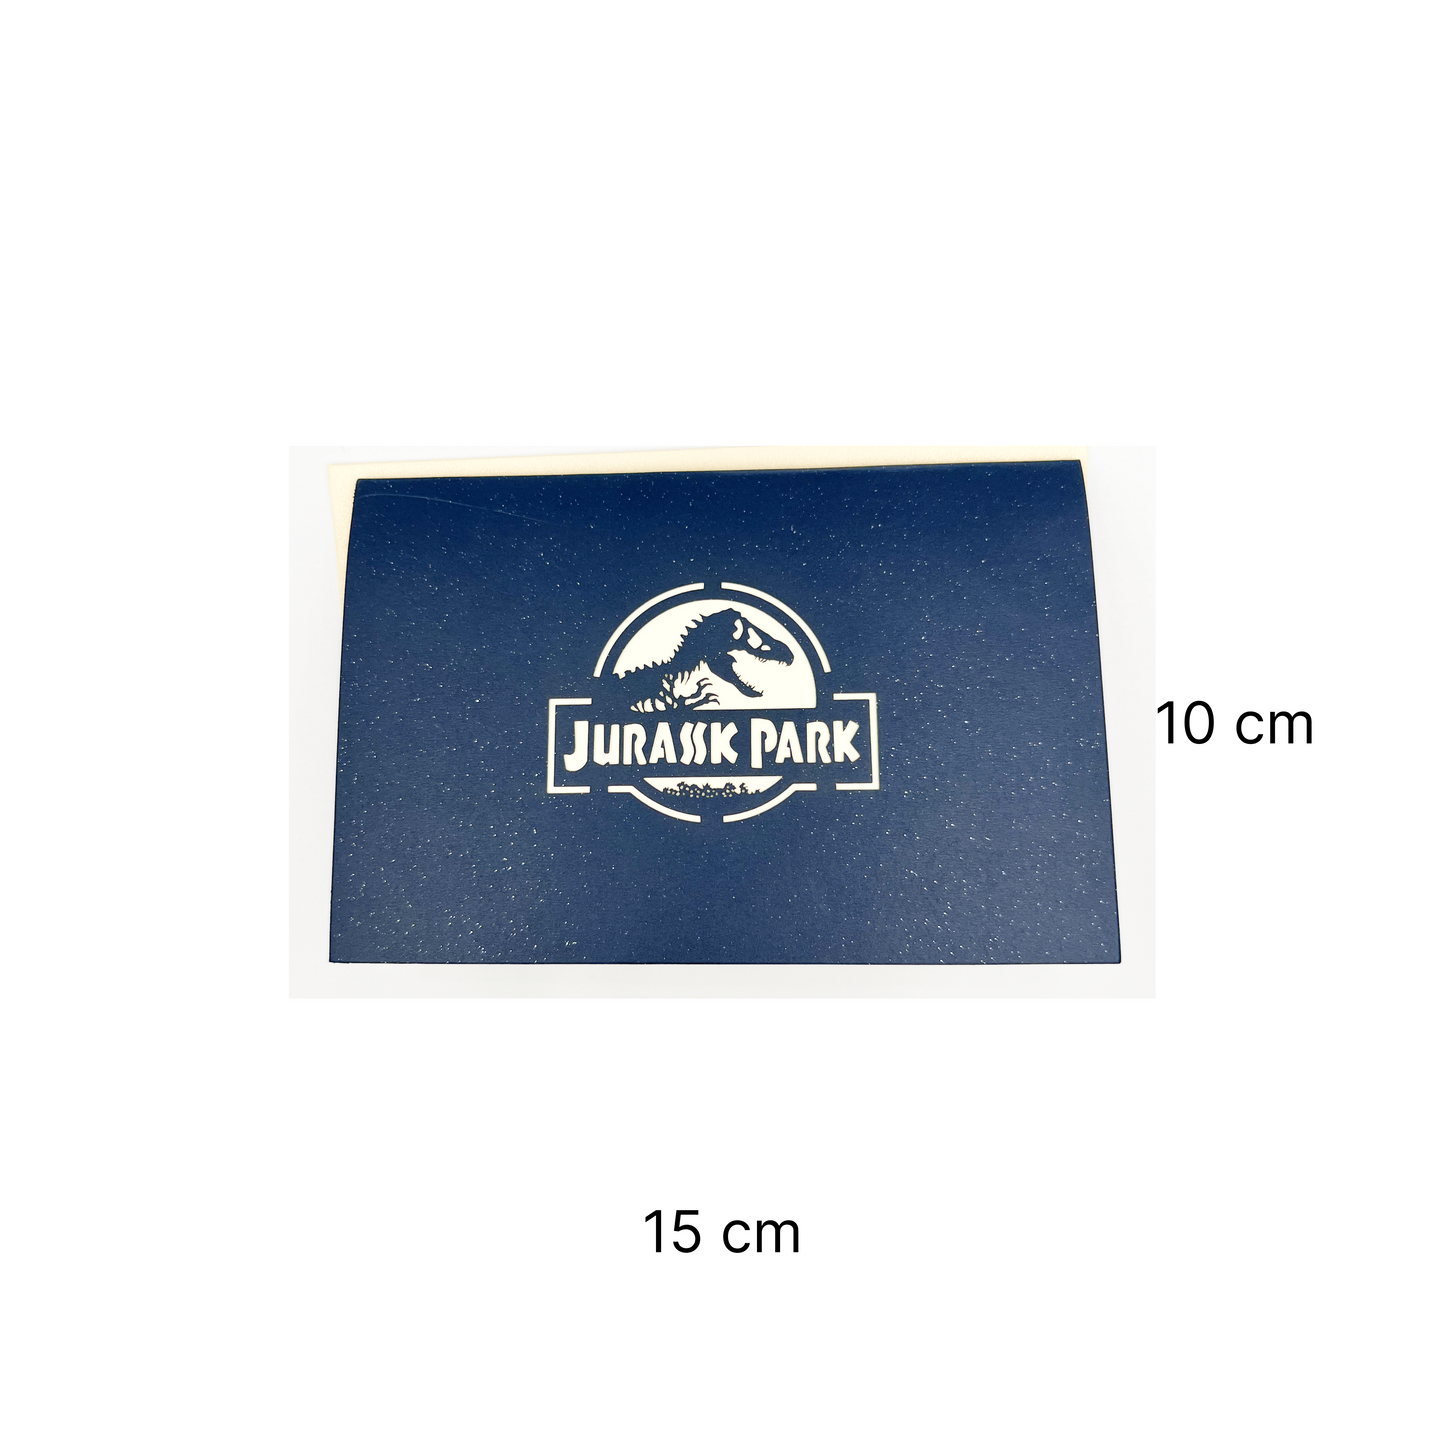 A2 - Jurassic Park 3D Pop Up Greeting Card With Envelope